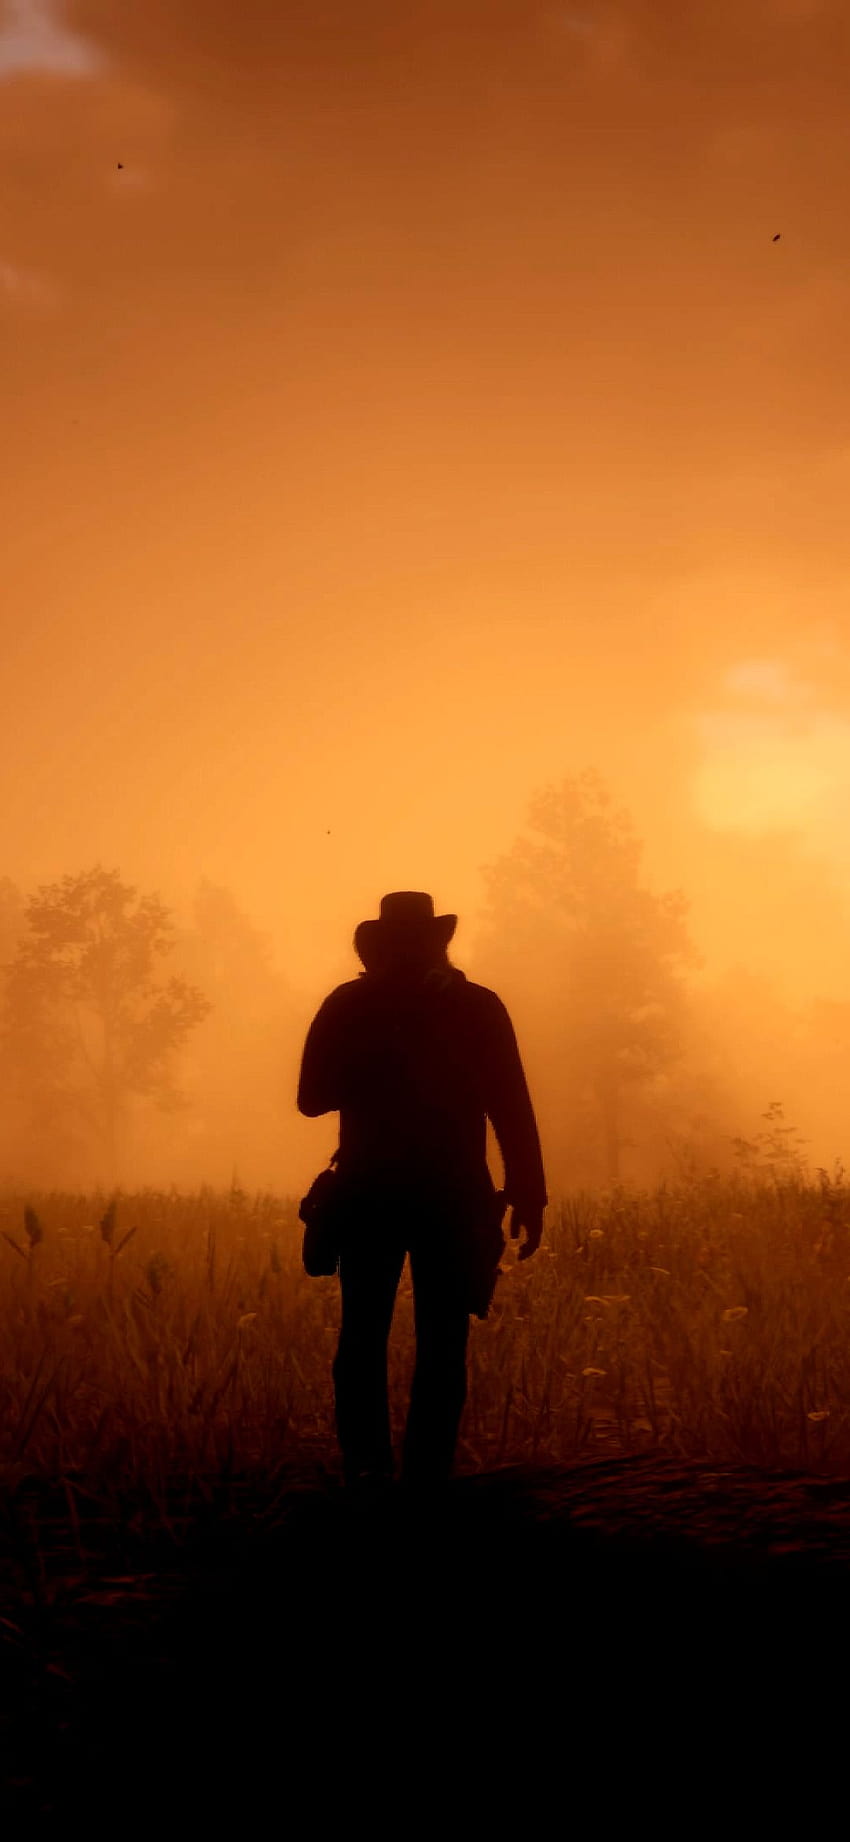 1080x2340 Game Red Dead Redemption 2 1080x2340 Resolution, red dead redemption 2 for mobile HD phone wallpaper